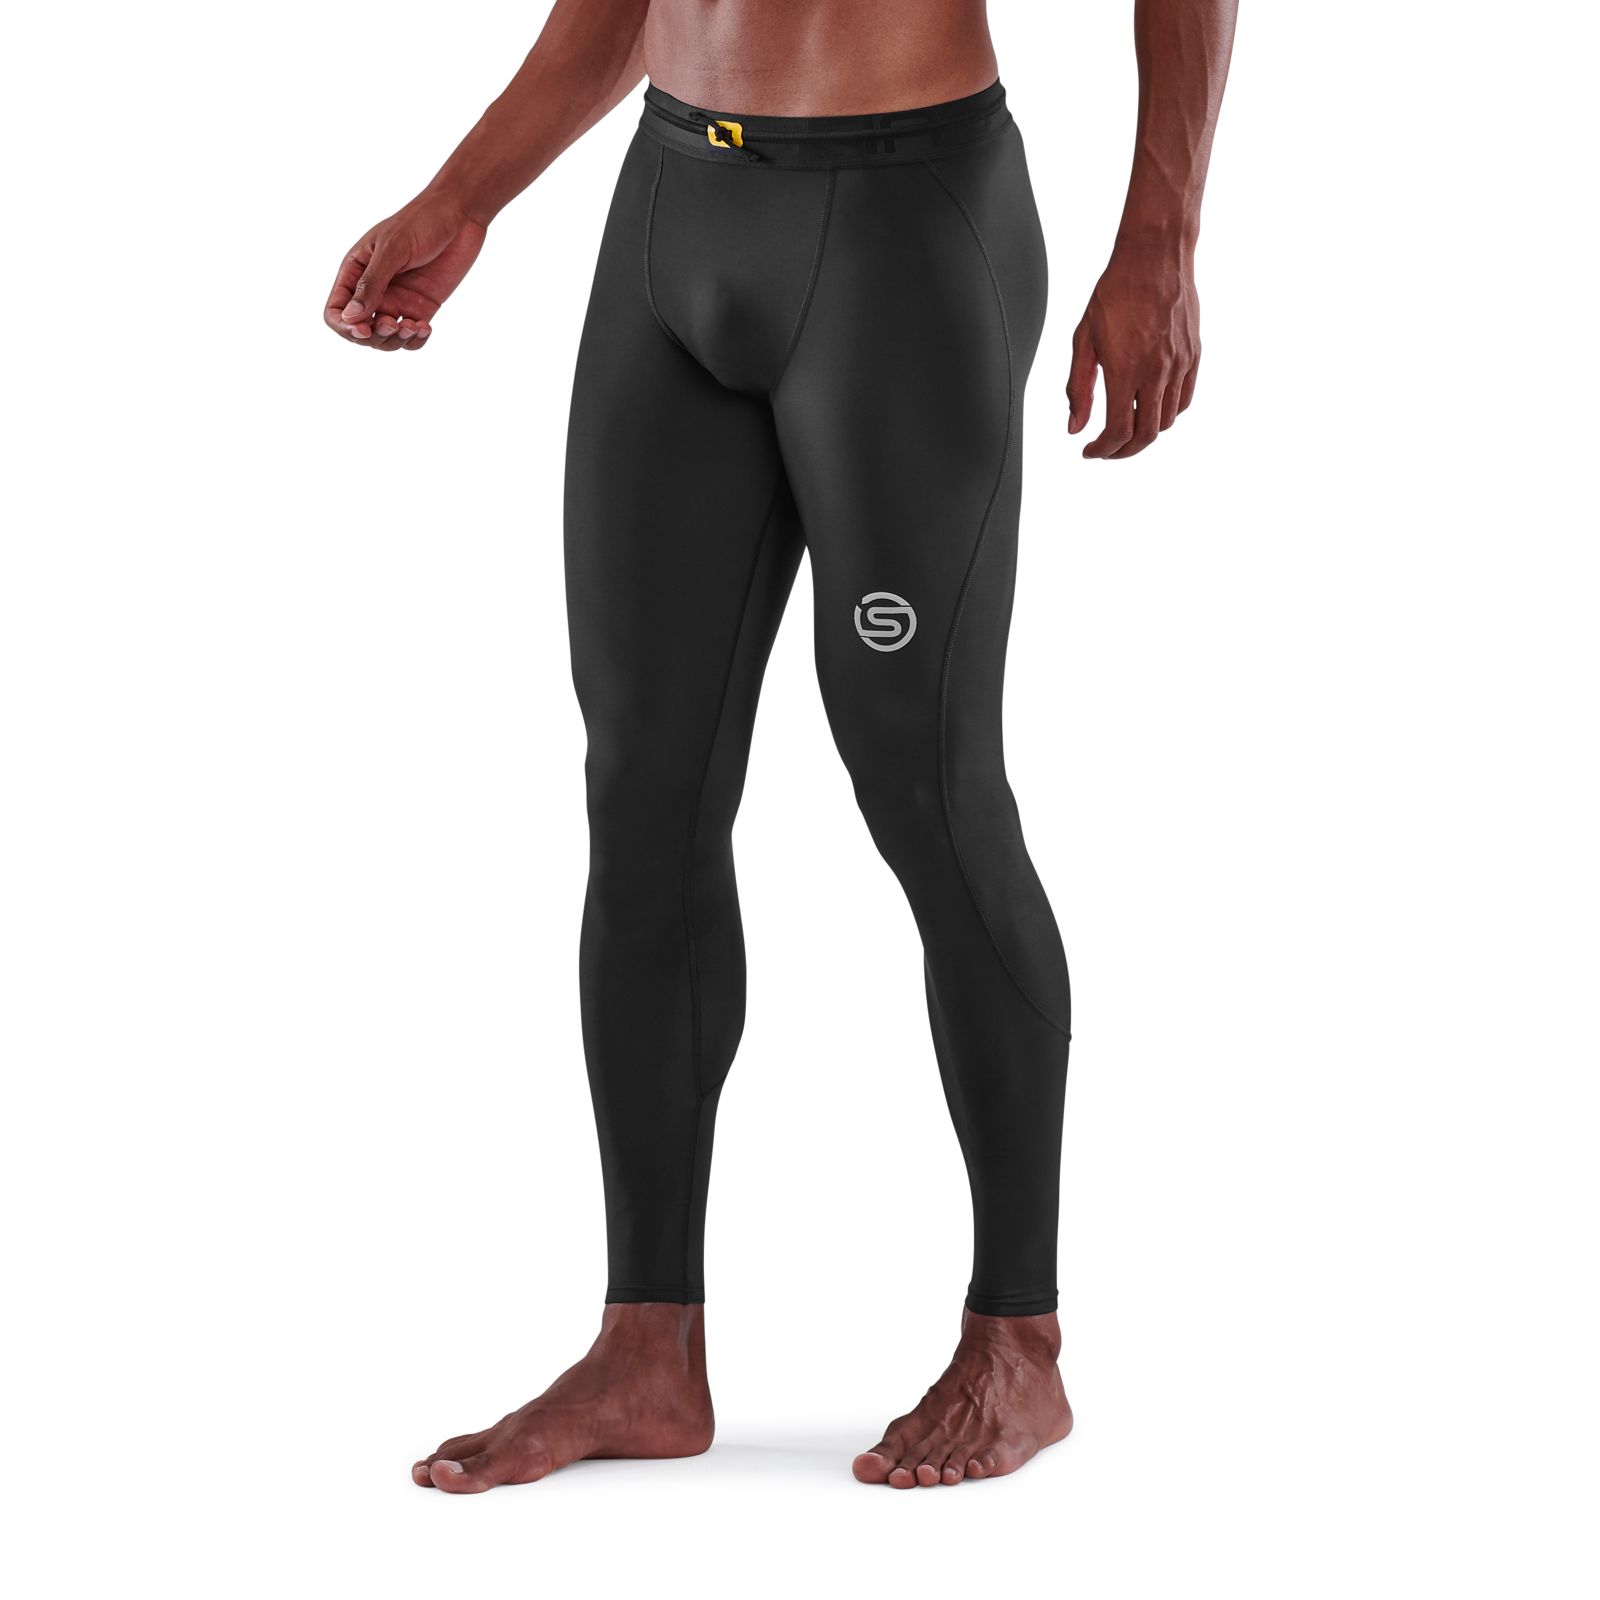 SKINS SERIES-3 MEN\'S TRAVEL AND Compression - TIGHTS RECOVERY LONG BLACK SKINS USA